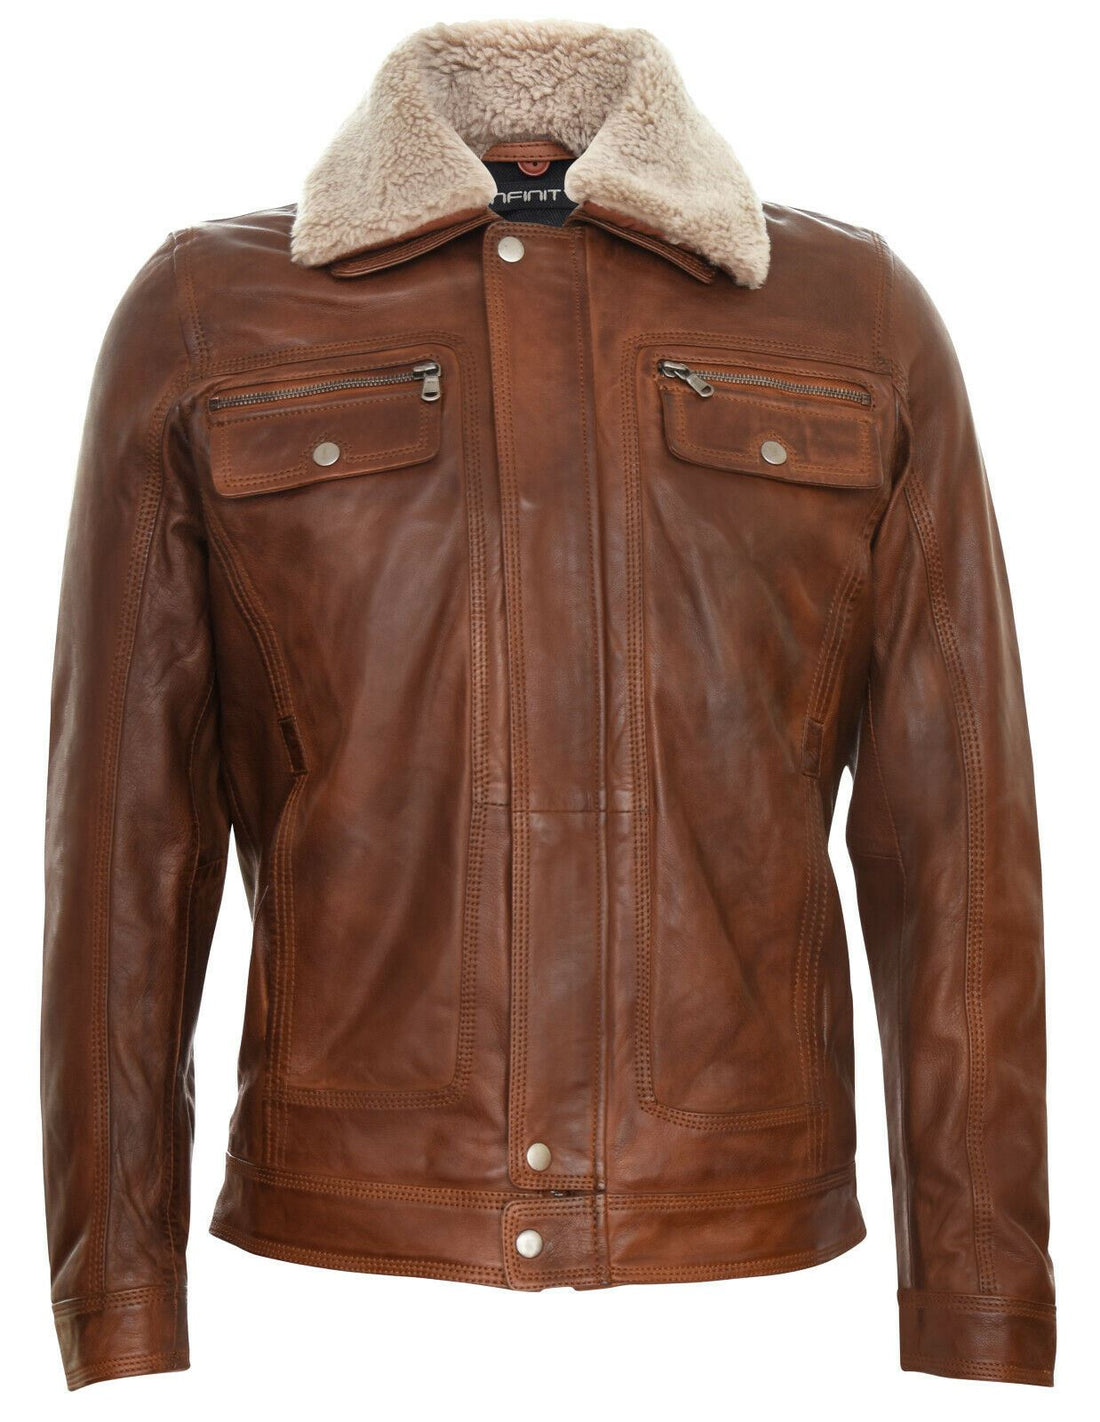 Mens Trucker Style Leather Jacket-Daventry - Upperclass Fashions 